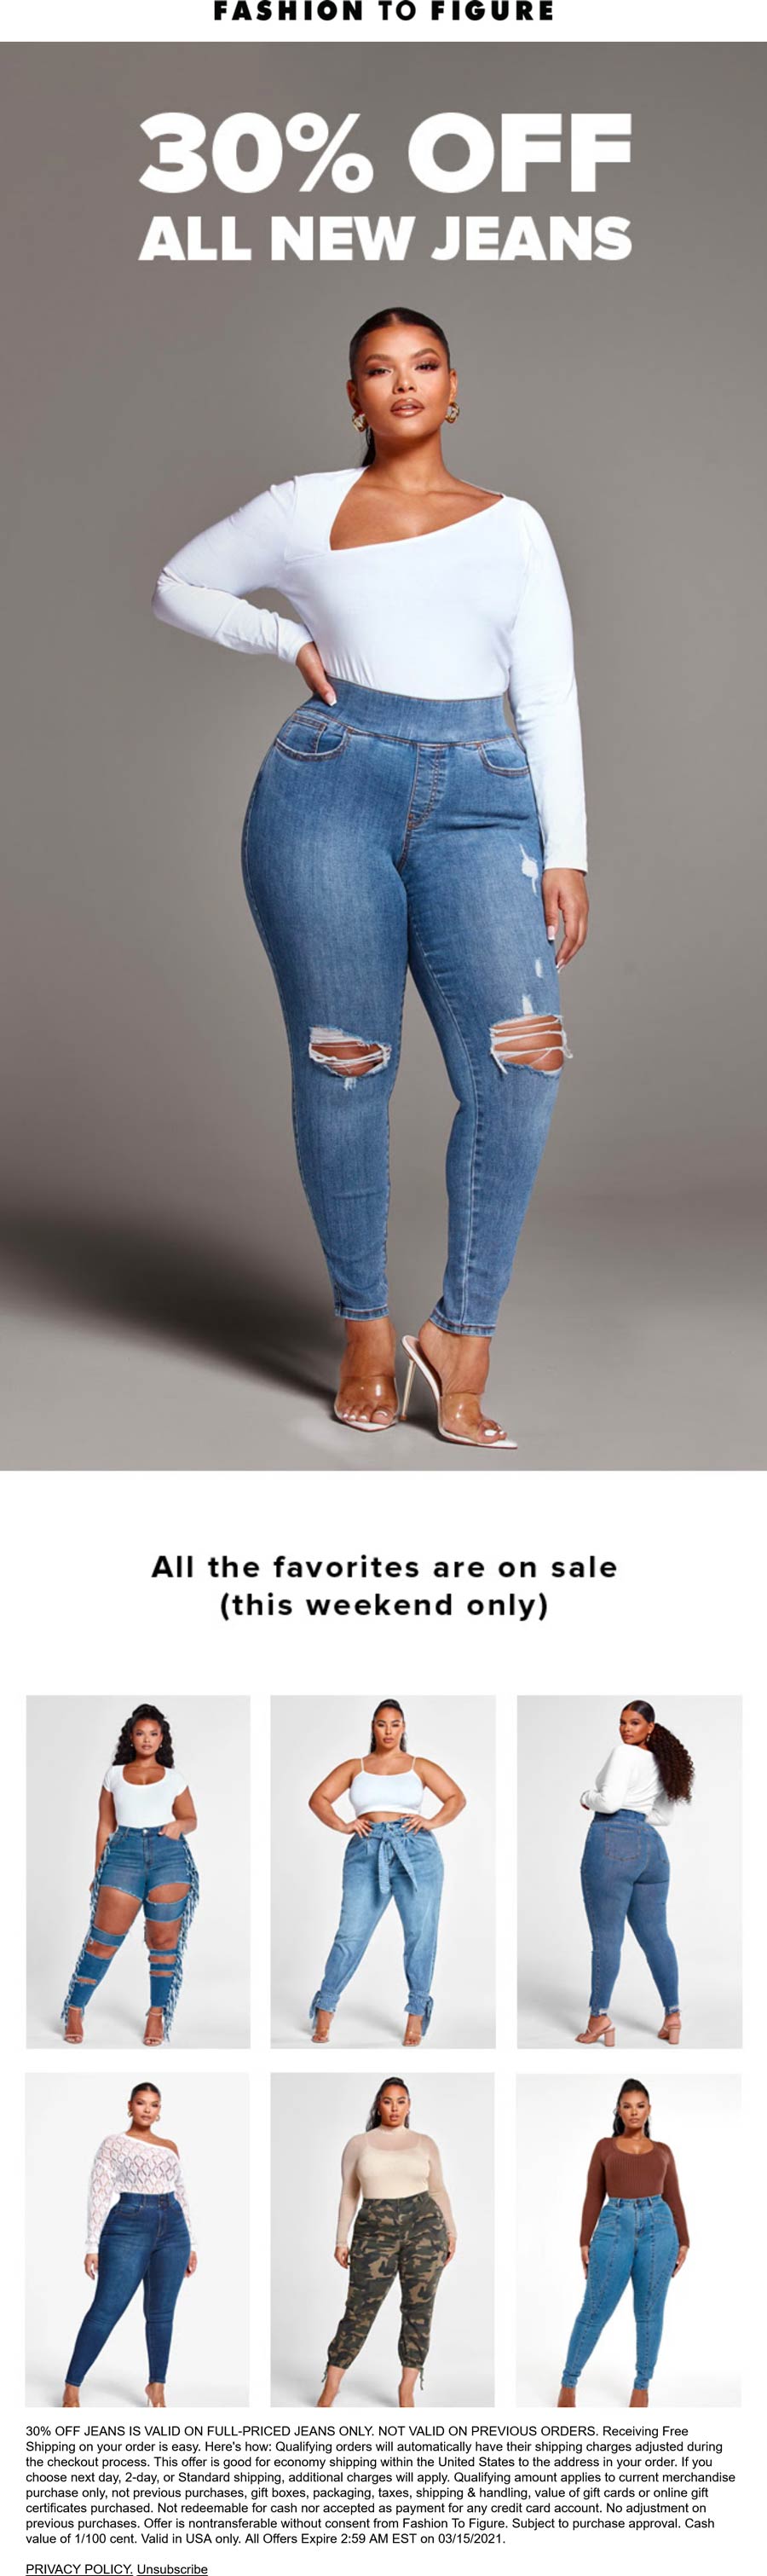 Fashion to Figure stores Coupon  30% off jeans at Fashion to Figure #fashiontofigure 